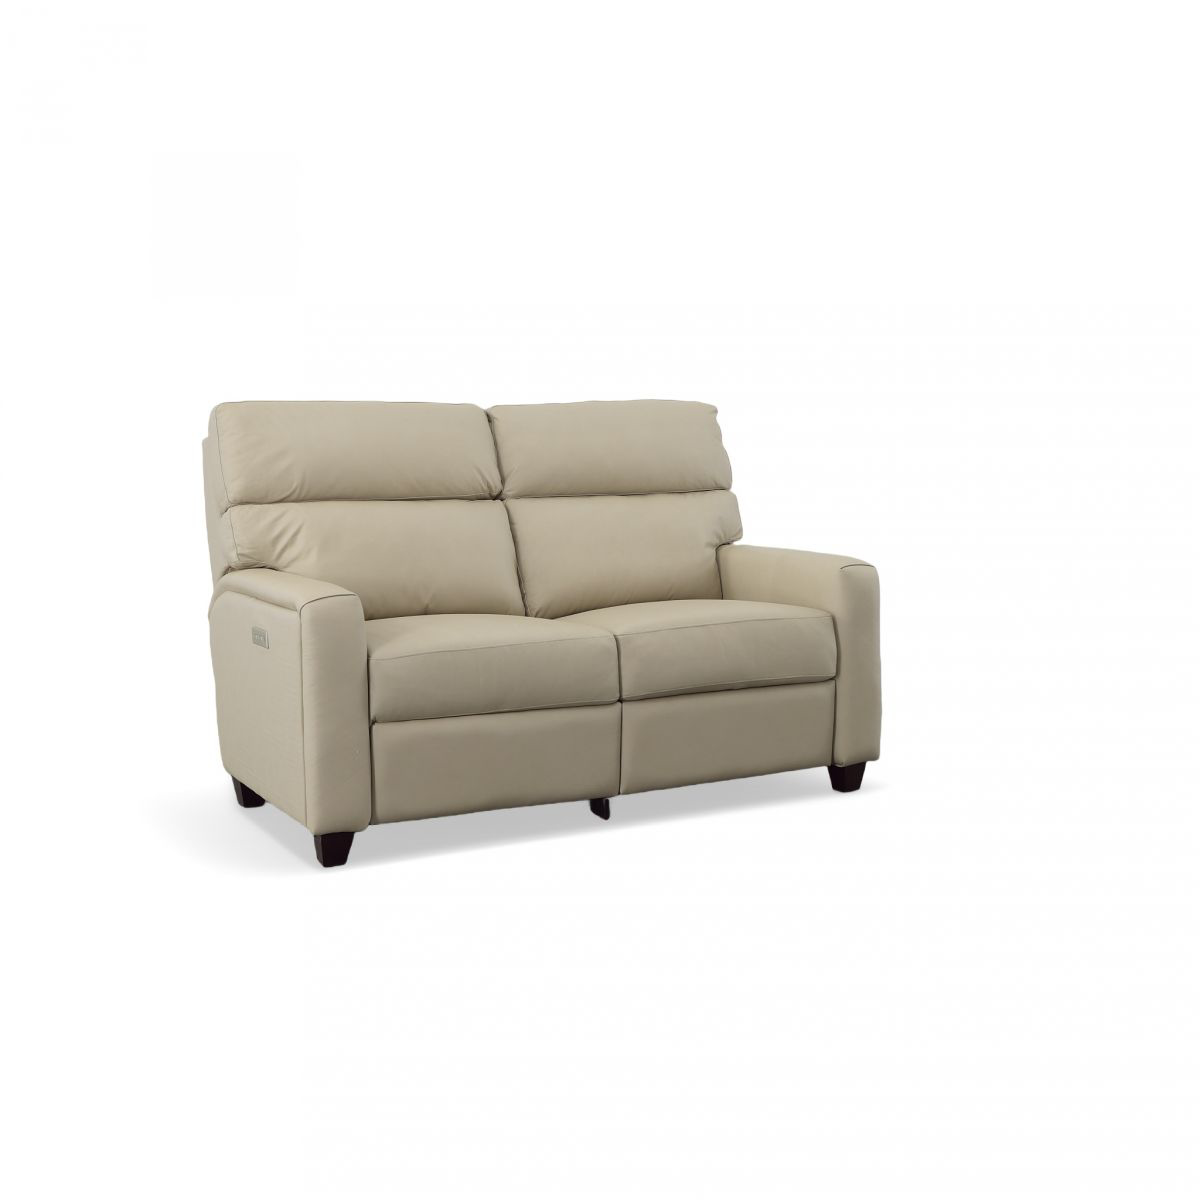 Picture of MIONA TAN LOVESEAT W/PHR